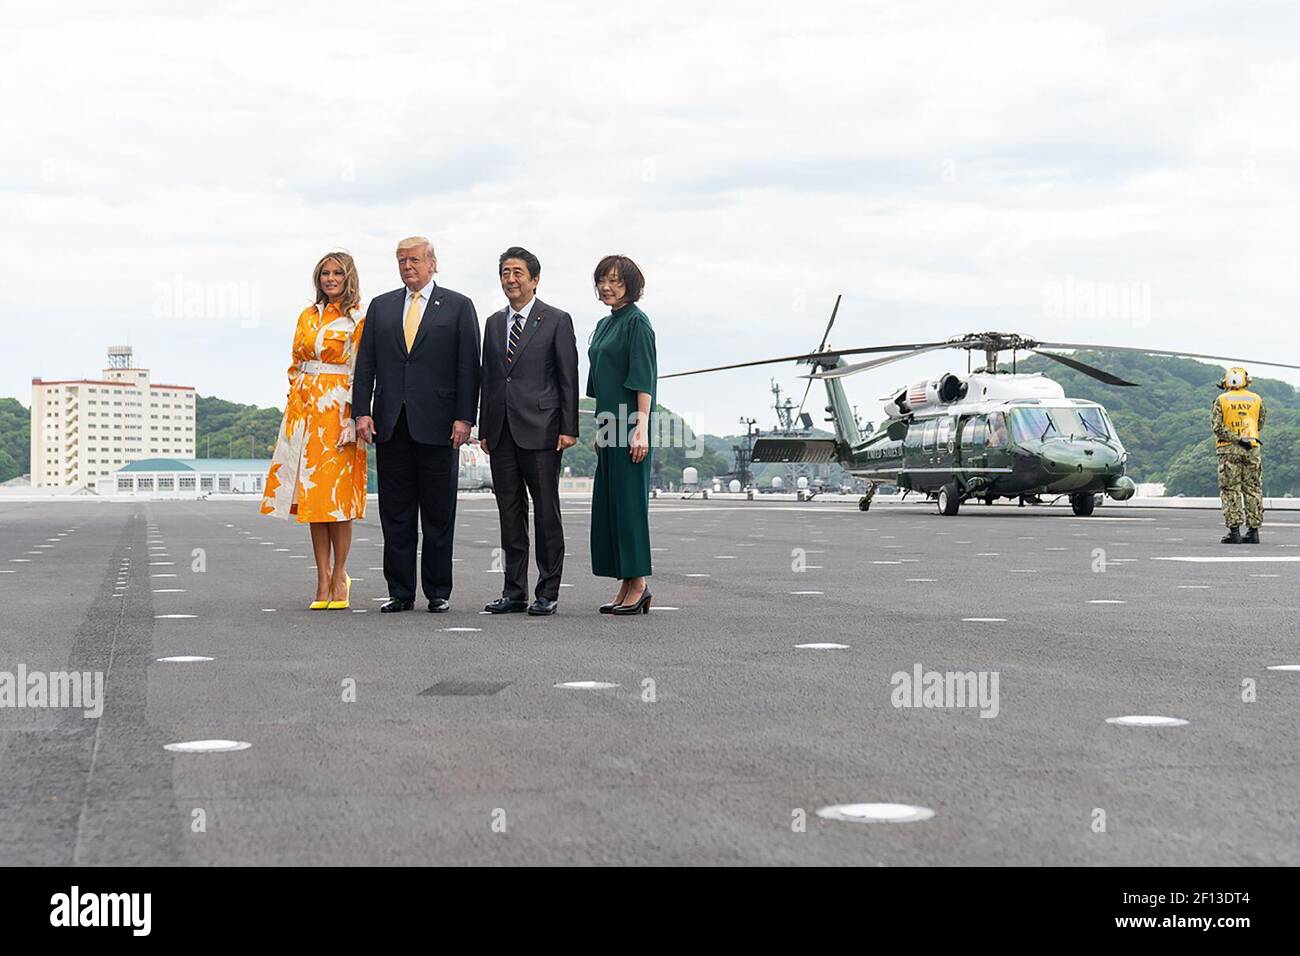 President Donald Trump First Lady Melania Trump the Prime Minister of Japan Shinzo Abe and his wife Mrs. Akie Abe pose for a photo aboard the JS Kaga Tuesday May 28 2019 in Yokosuka Japan. Stock Photo